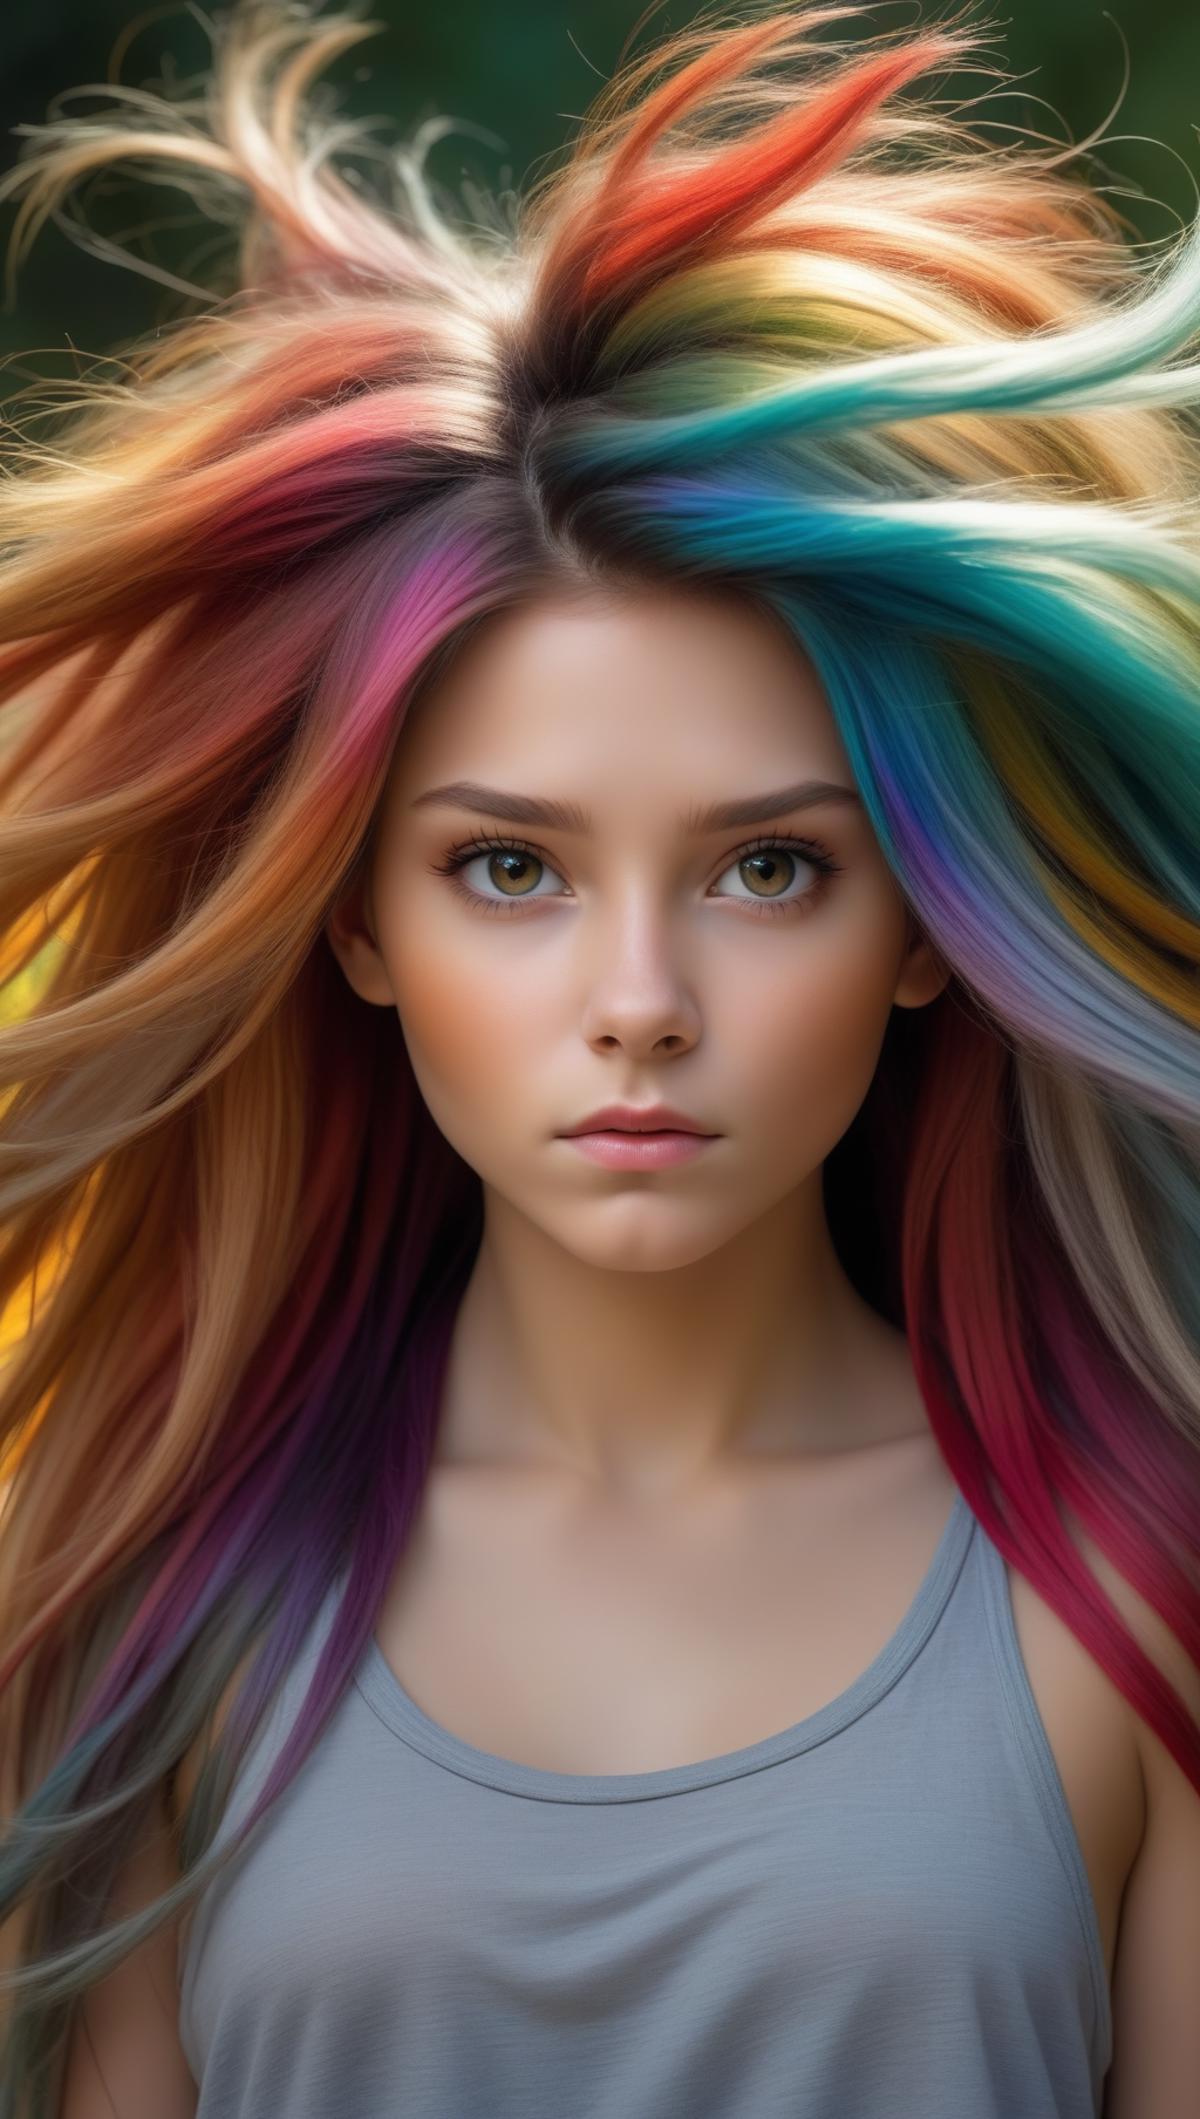 A woman with rainbow-colored hair looking to the side.